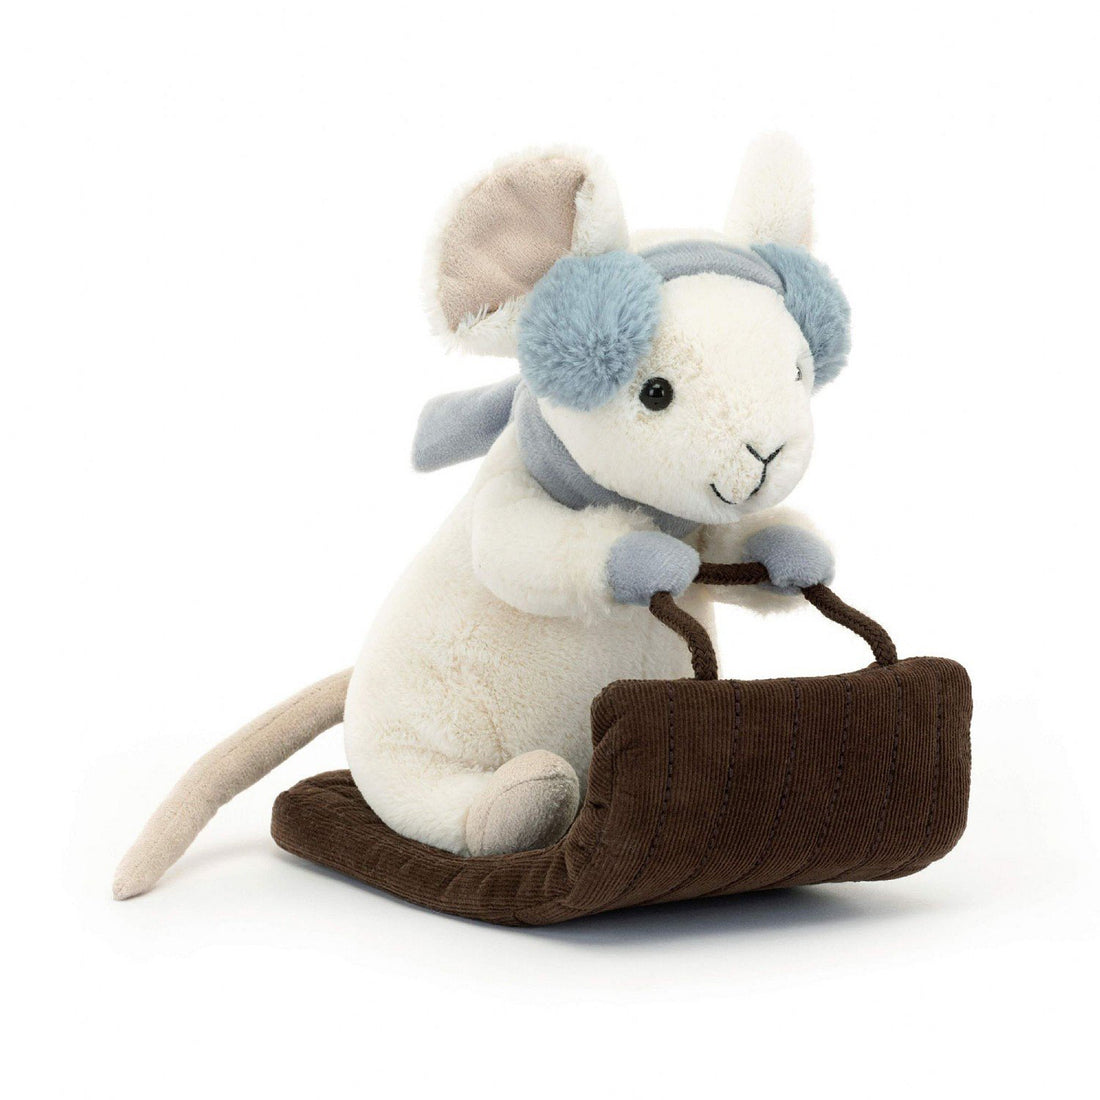 jellycat-merry-mouse-sleighing-jell-mer3sle